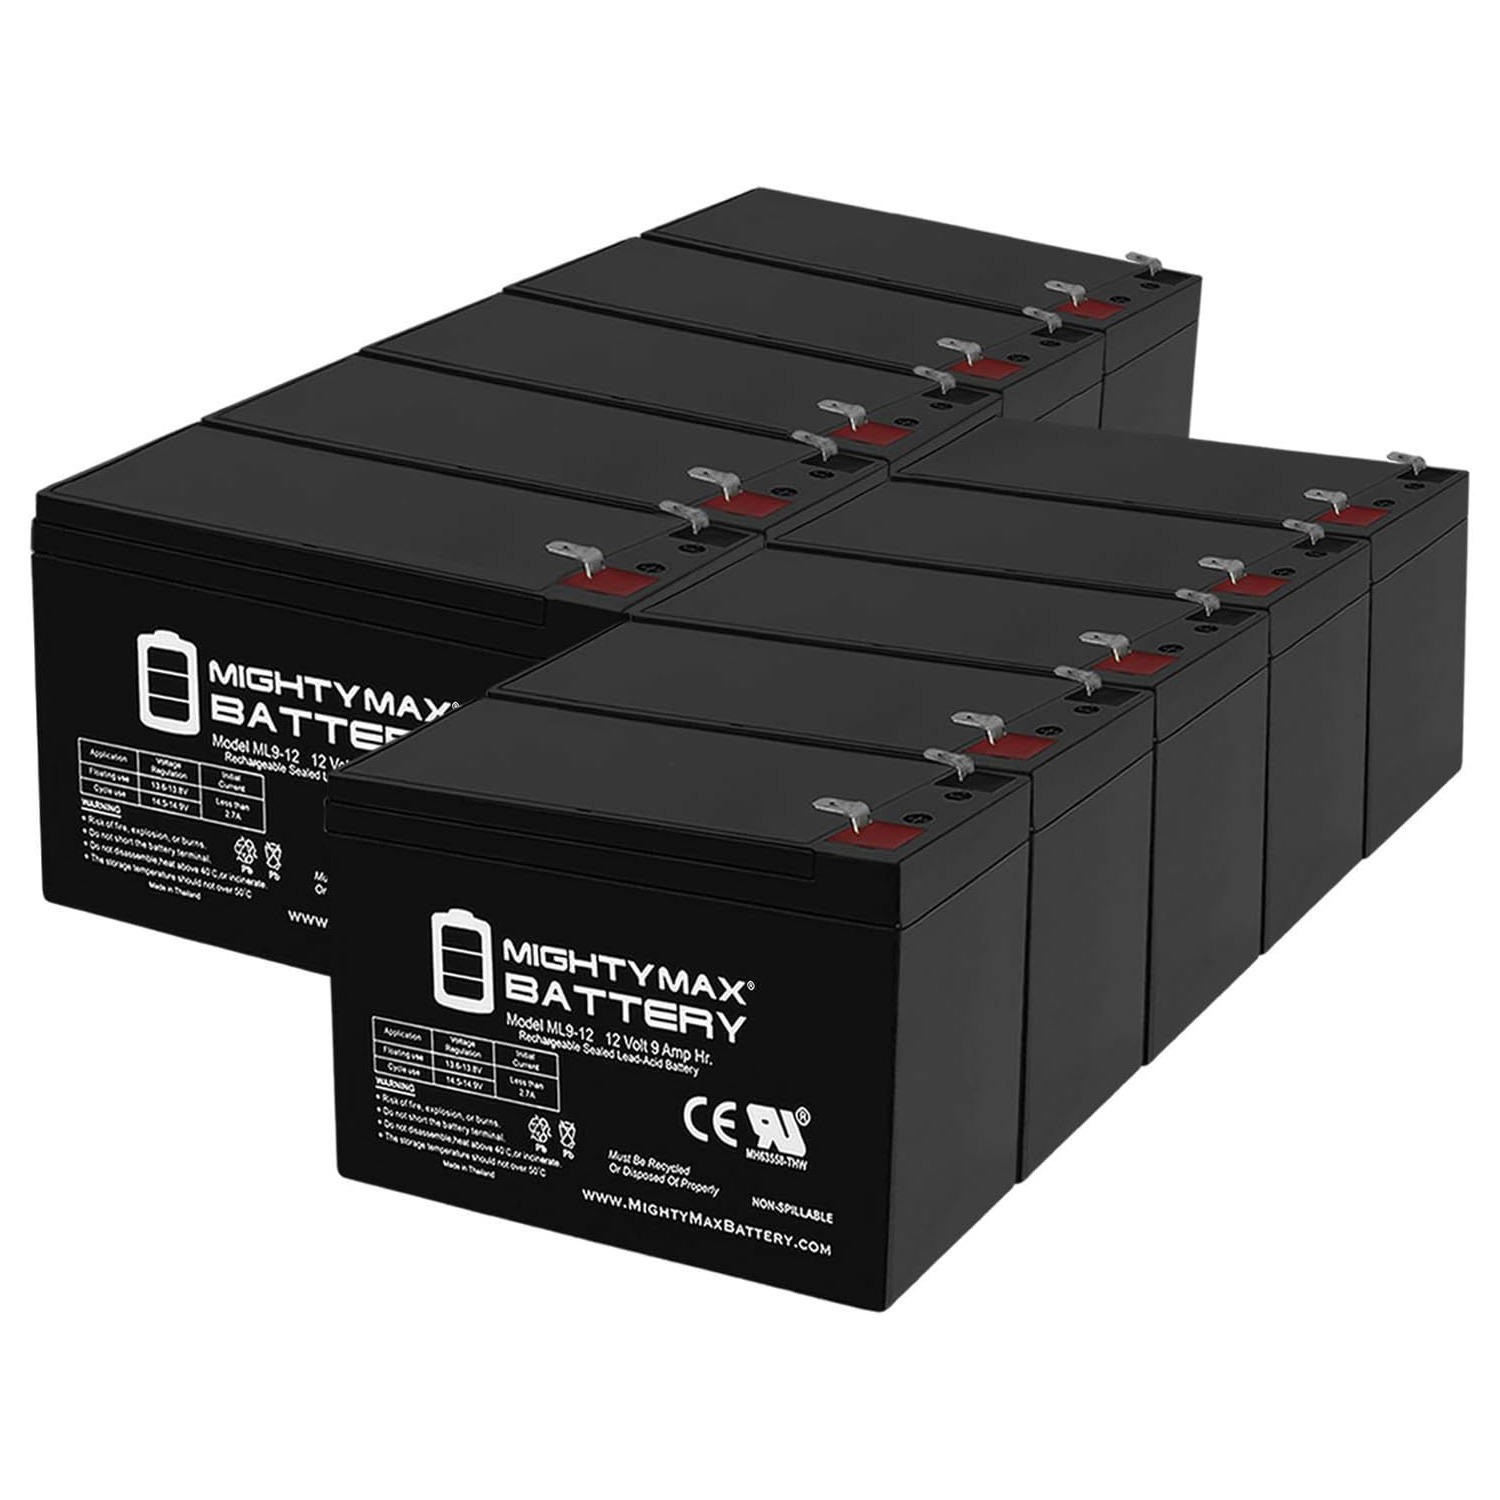 Altronix SMP5PMCTXPD4 12V, 9Ah Lead Acid Battery - 10 Pack